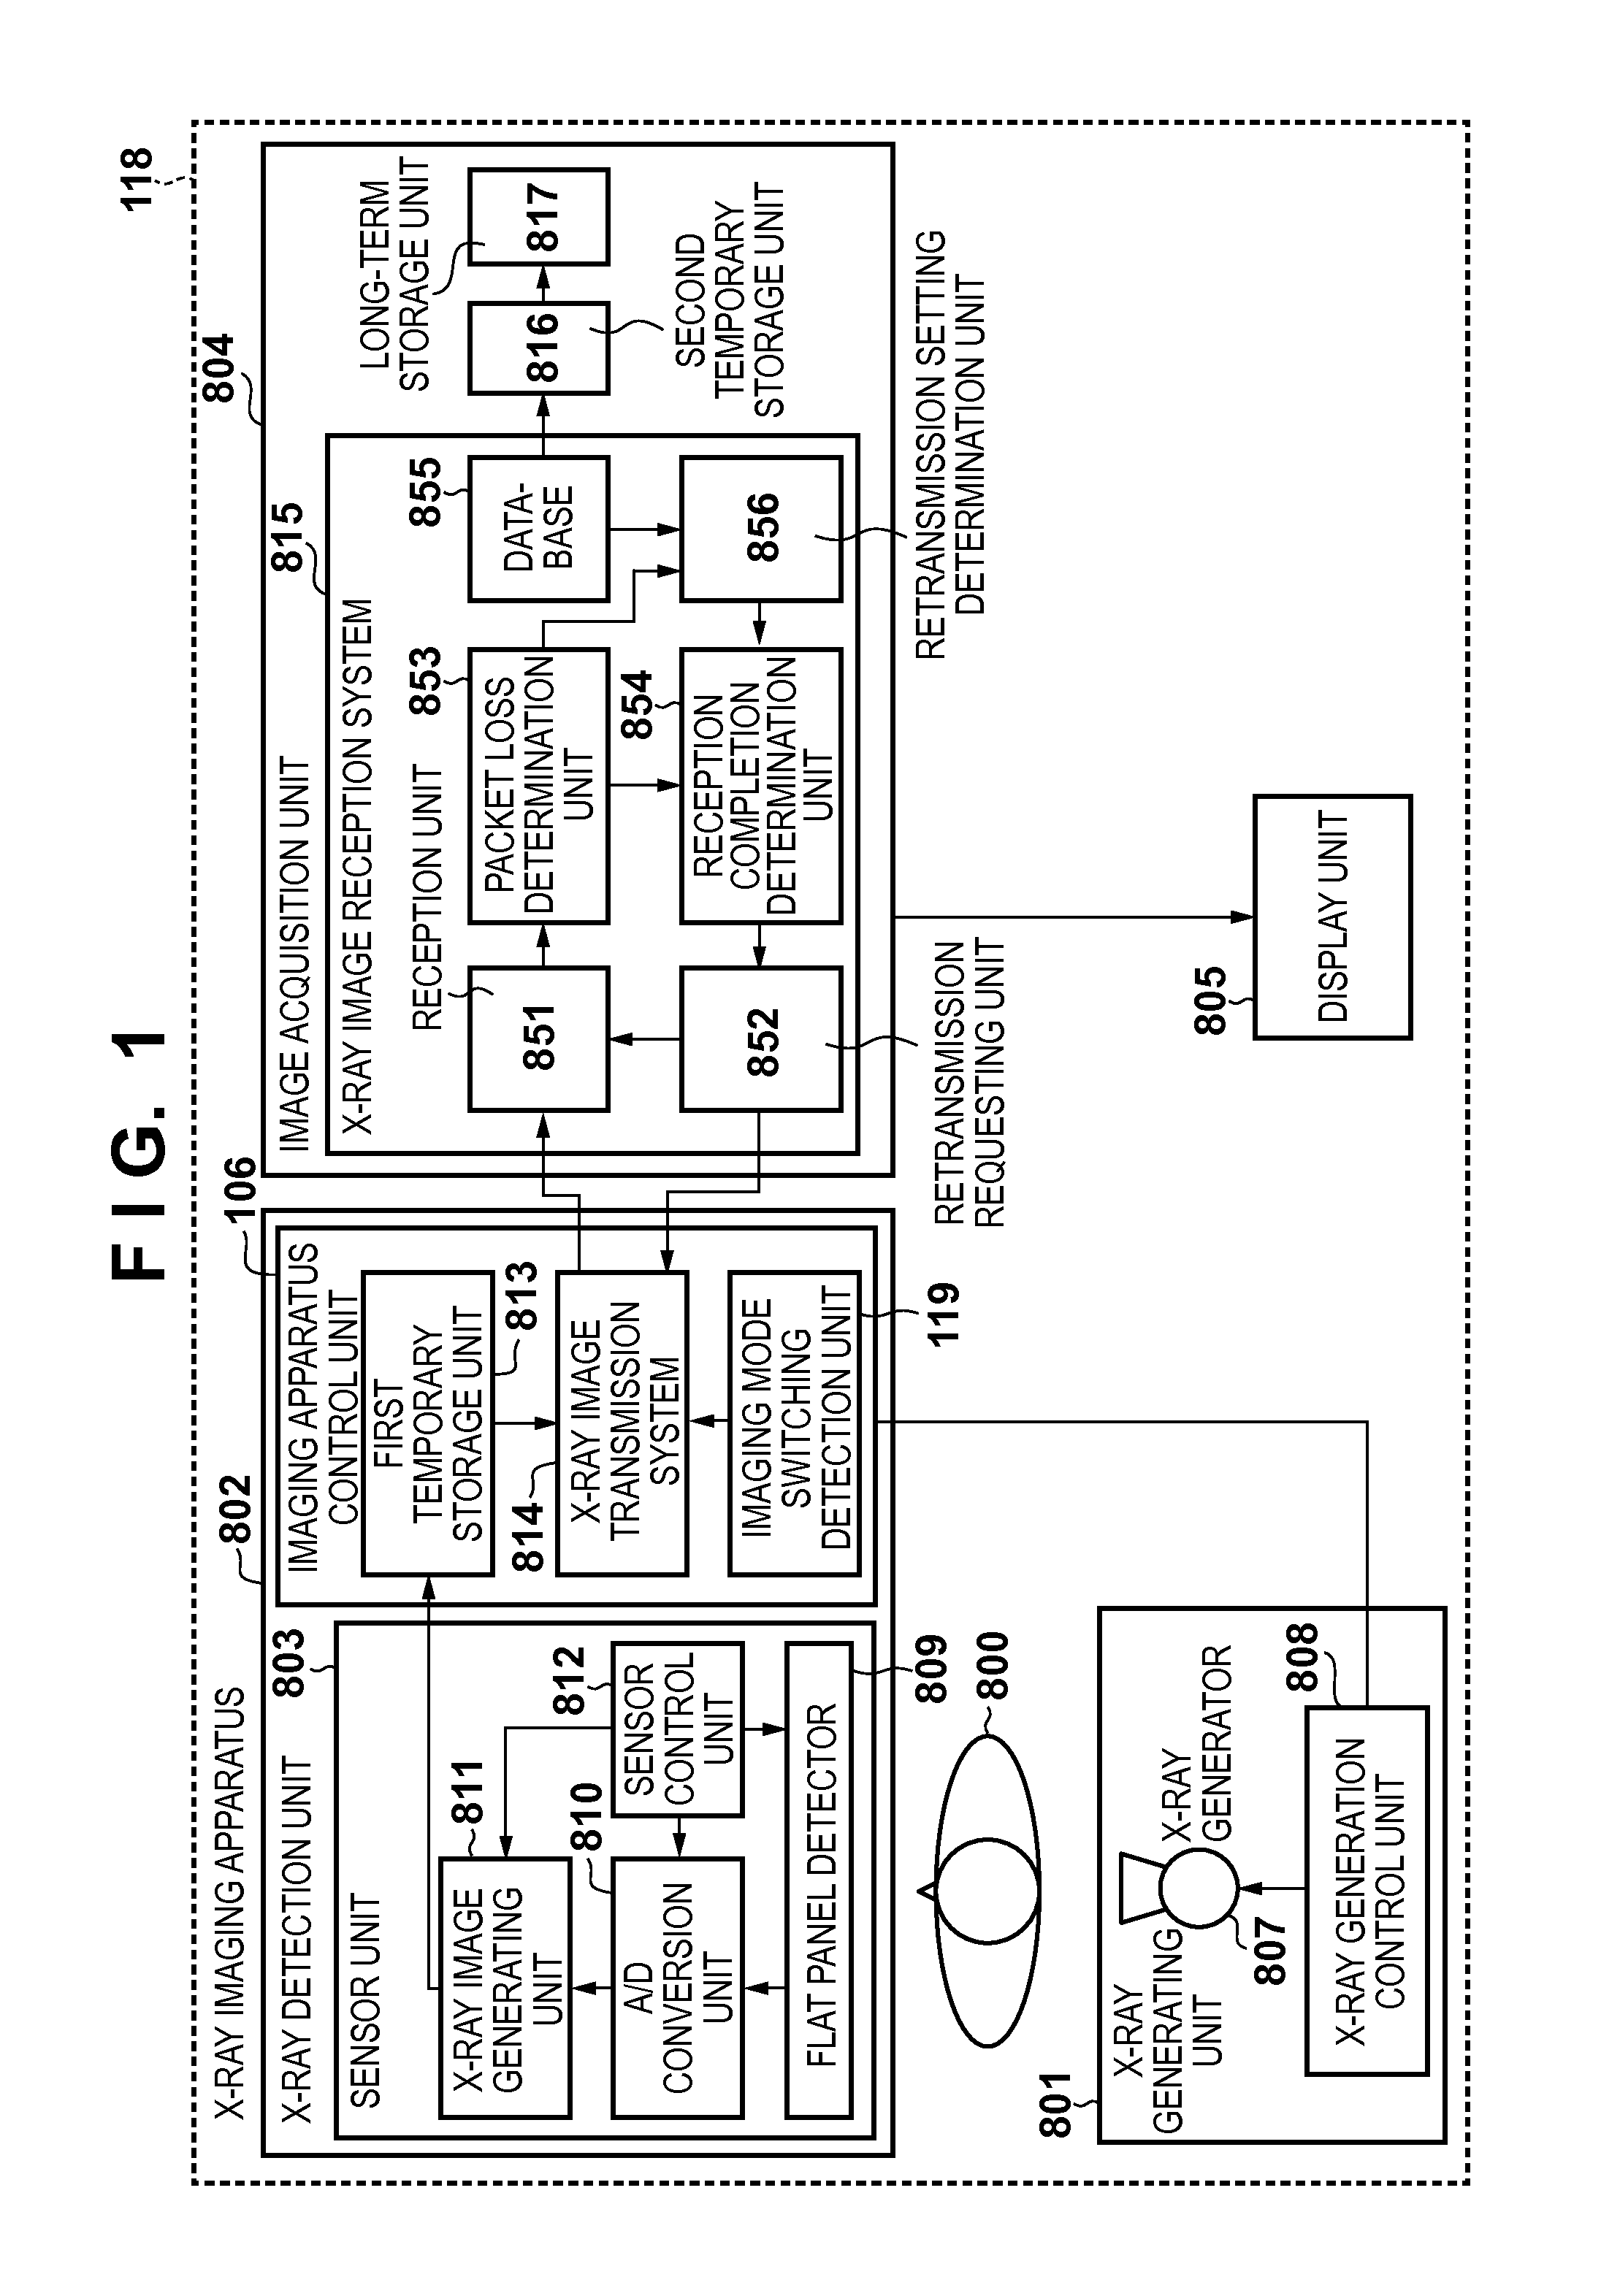 X-ray imaging apparatus, control device, radiation imaging apparatus, and method of controlling the same